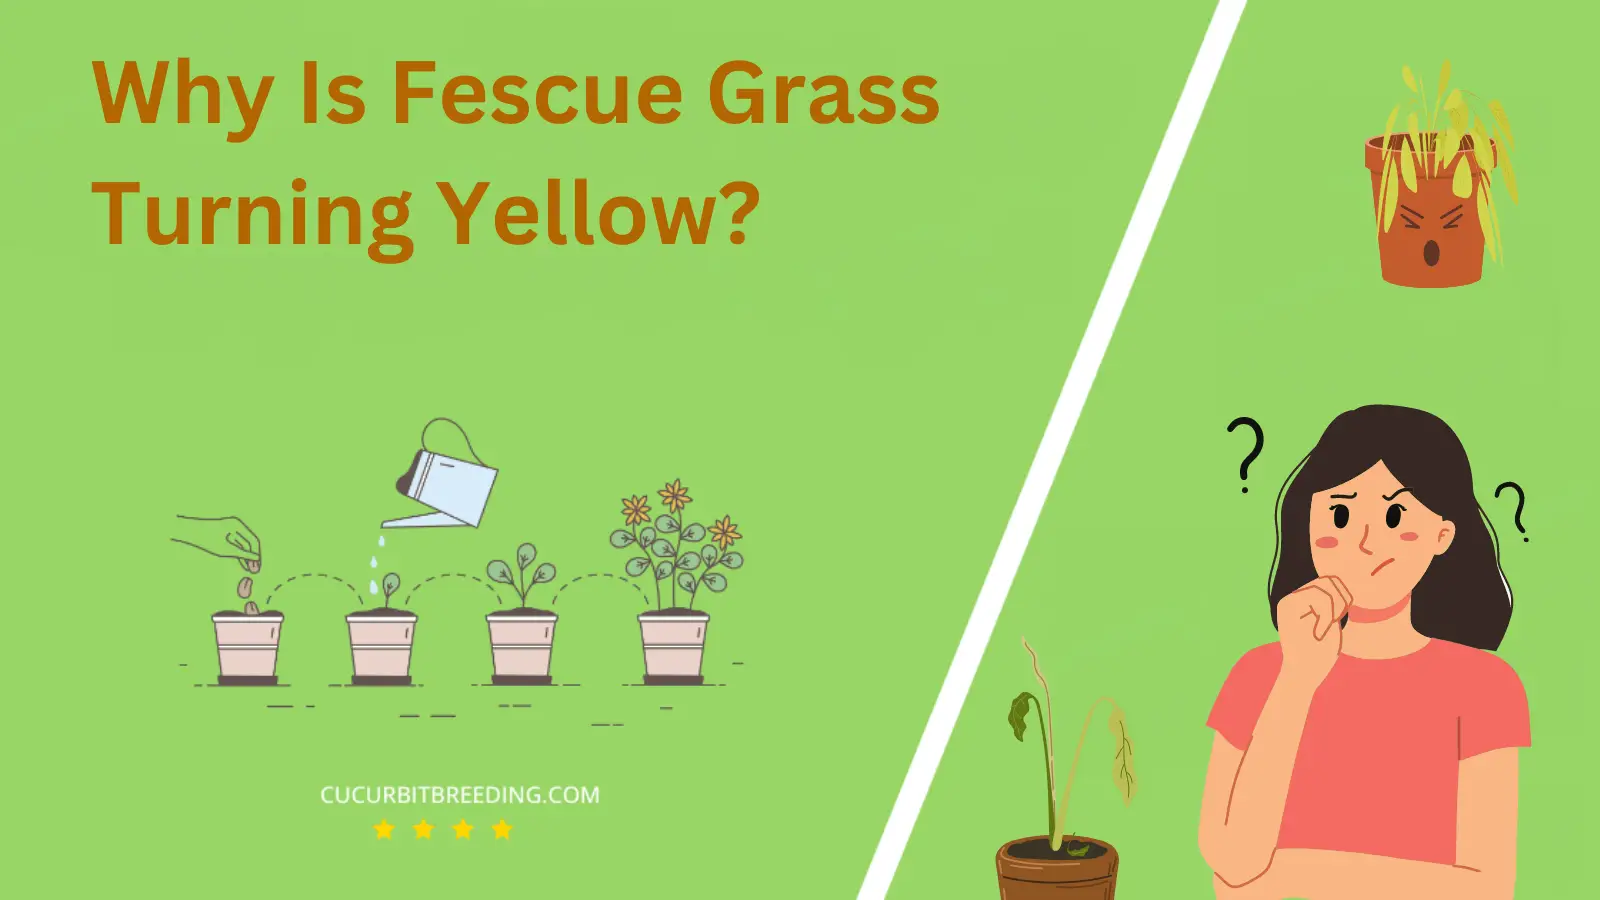 Why Is Fescue Grass Turning Yellow